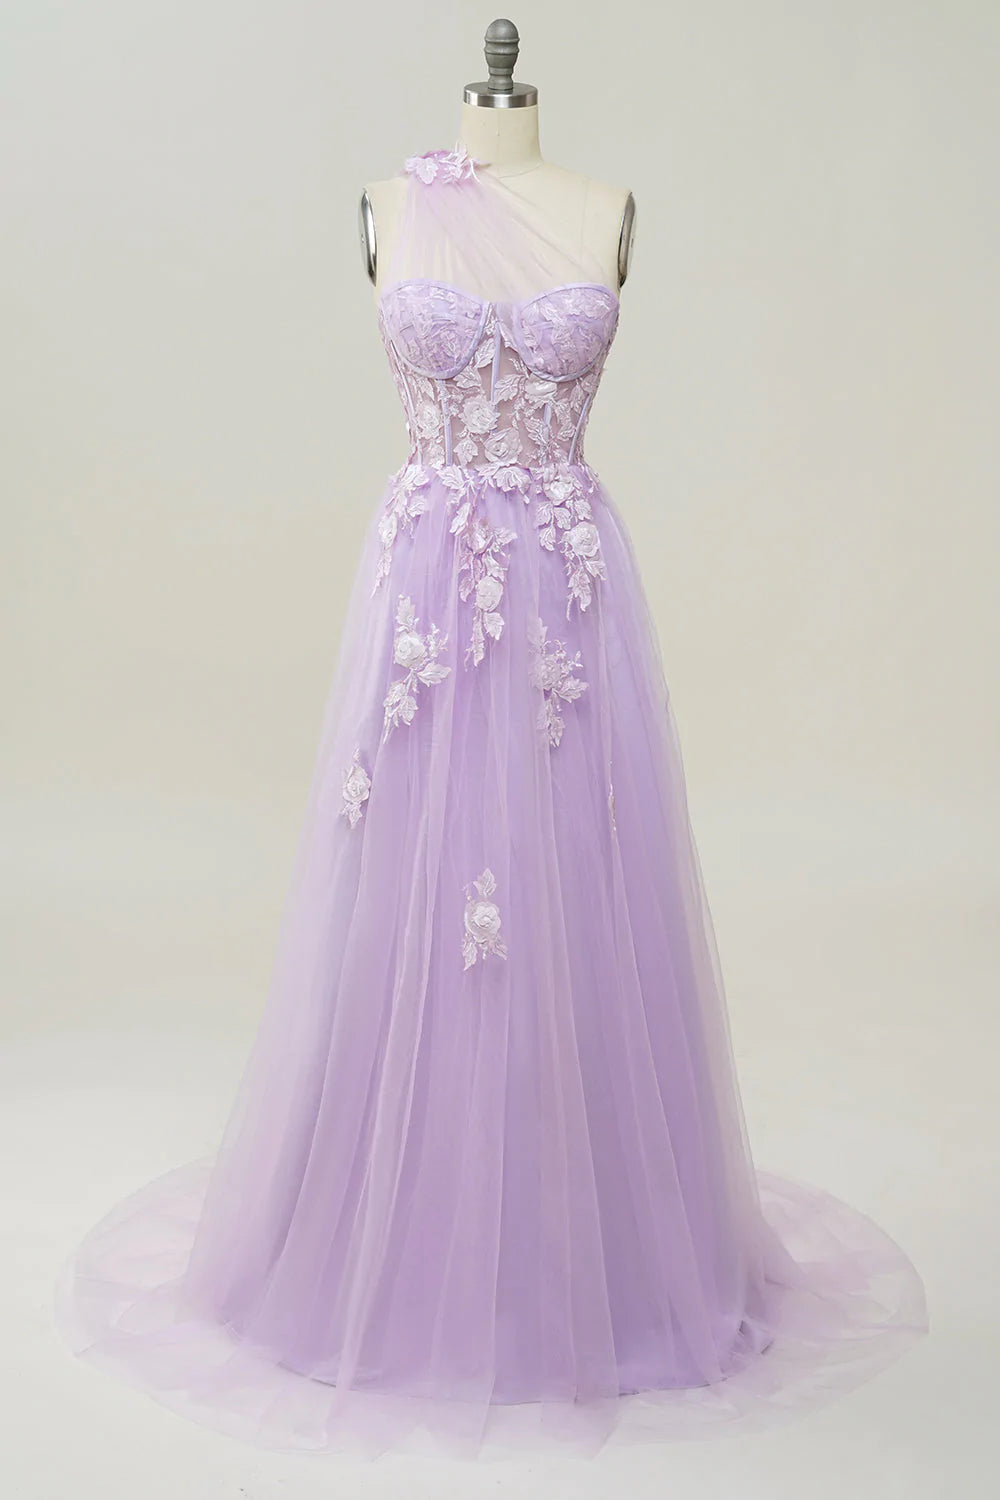 Glamorous One Shoulder Purple Tulle Prom Dress New Fashion Cloud Wedding  Gown - June Bridals